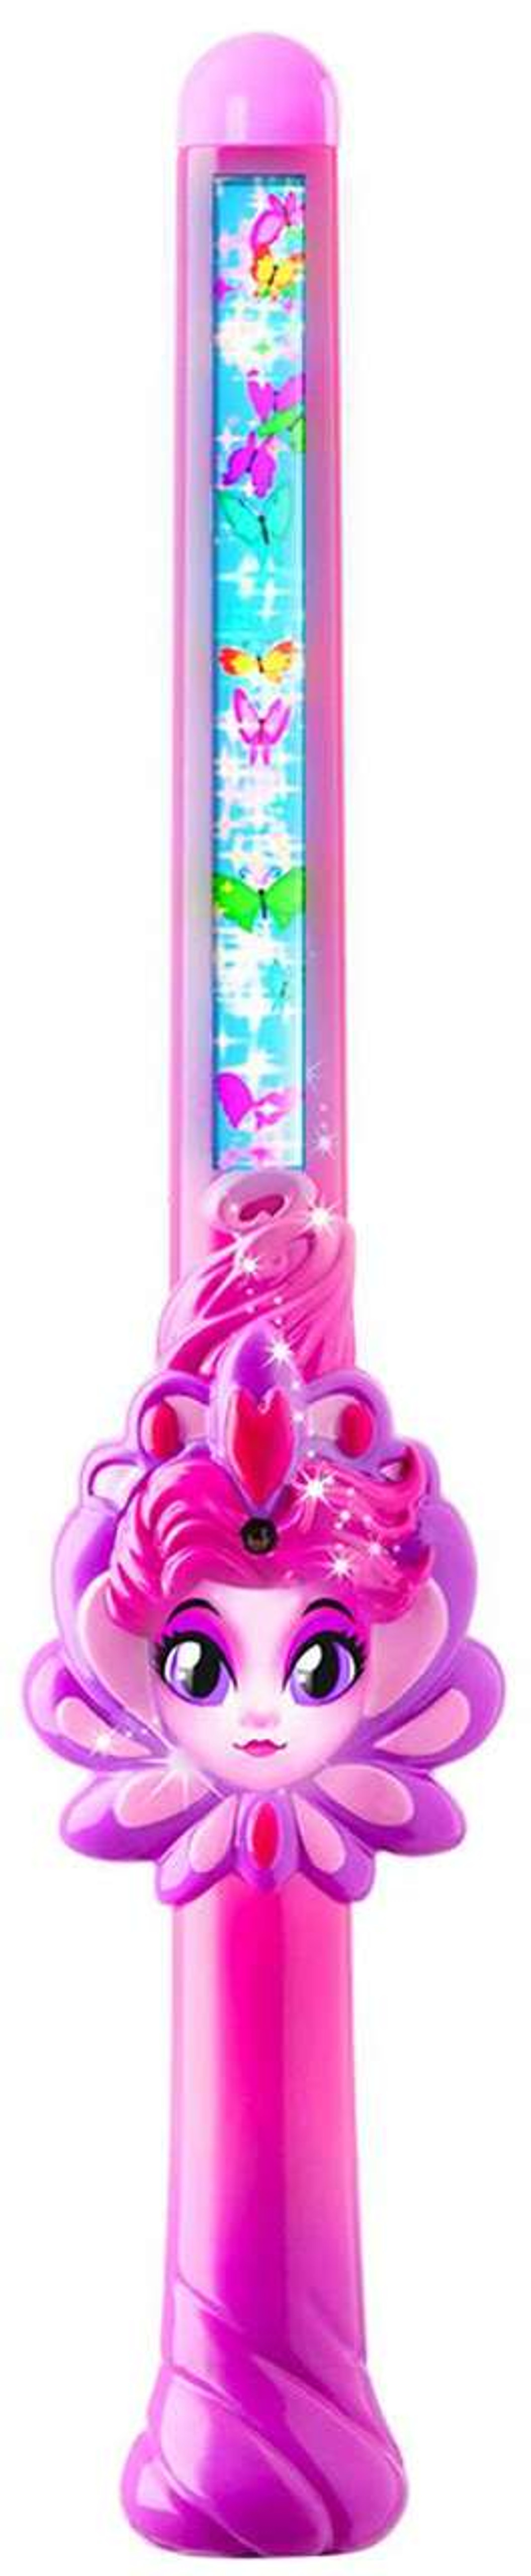 Of Dragons Fairies Wizards Lily Magic Fairy Wand Purple License To Play Toywiz